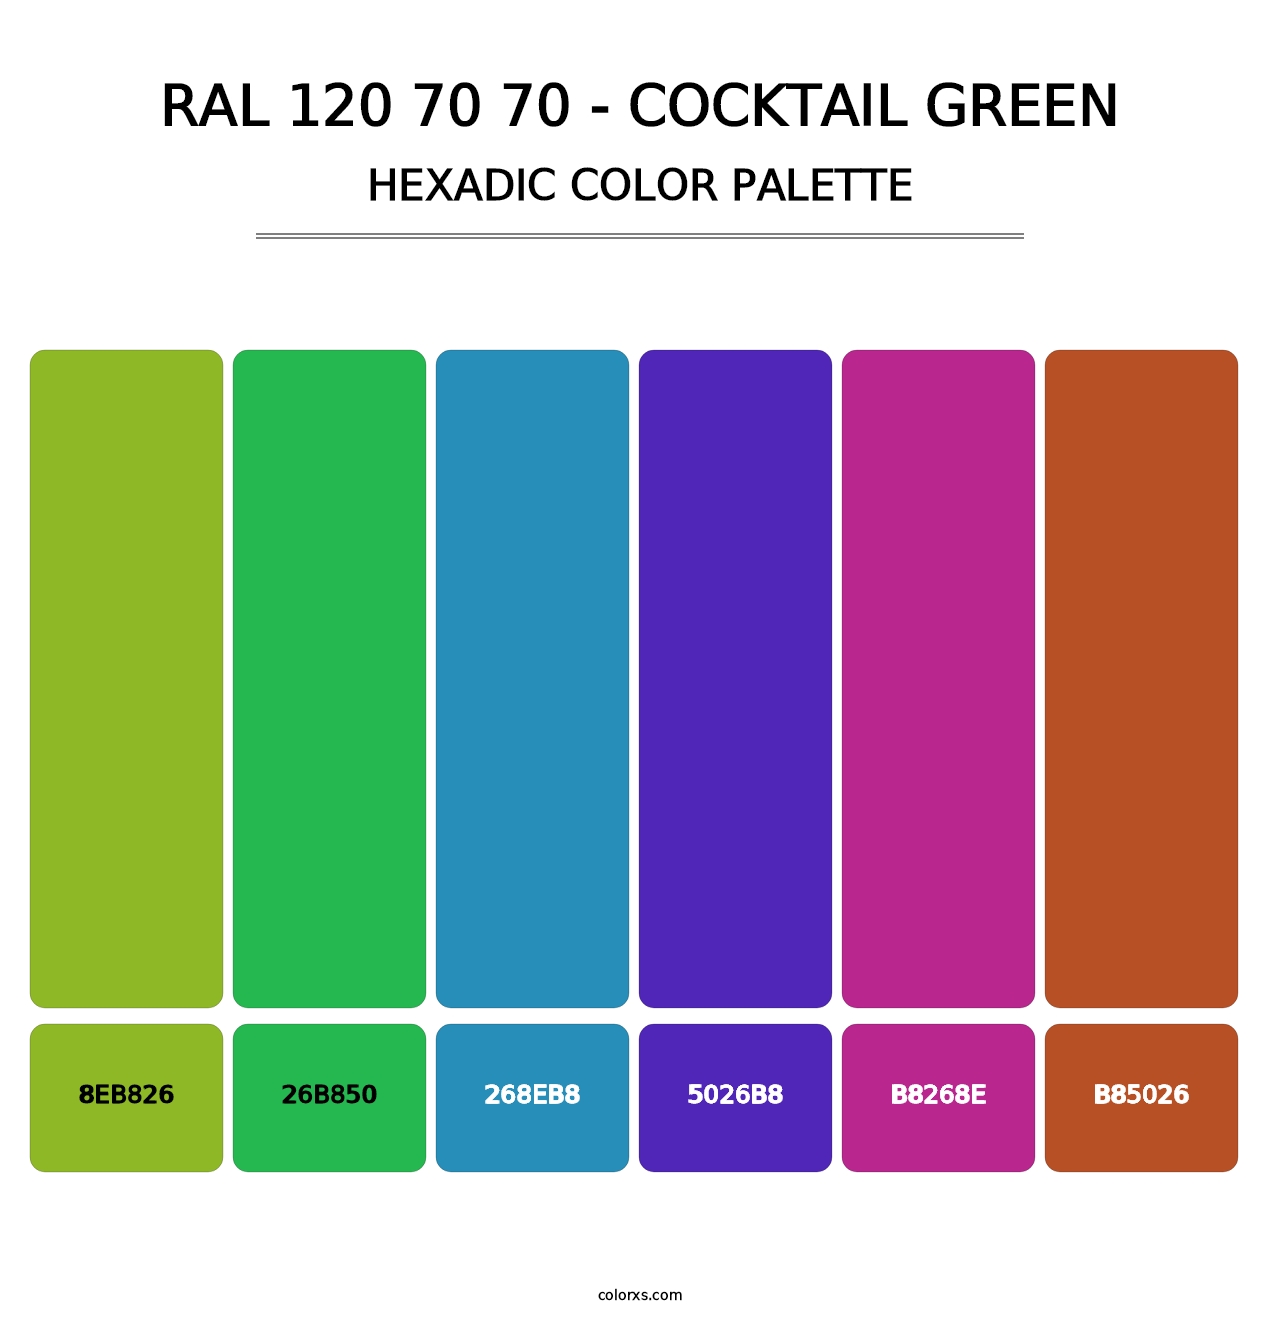 RAL 120 70 70 - Cocktail Green - Hexadic Color Palette